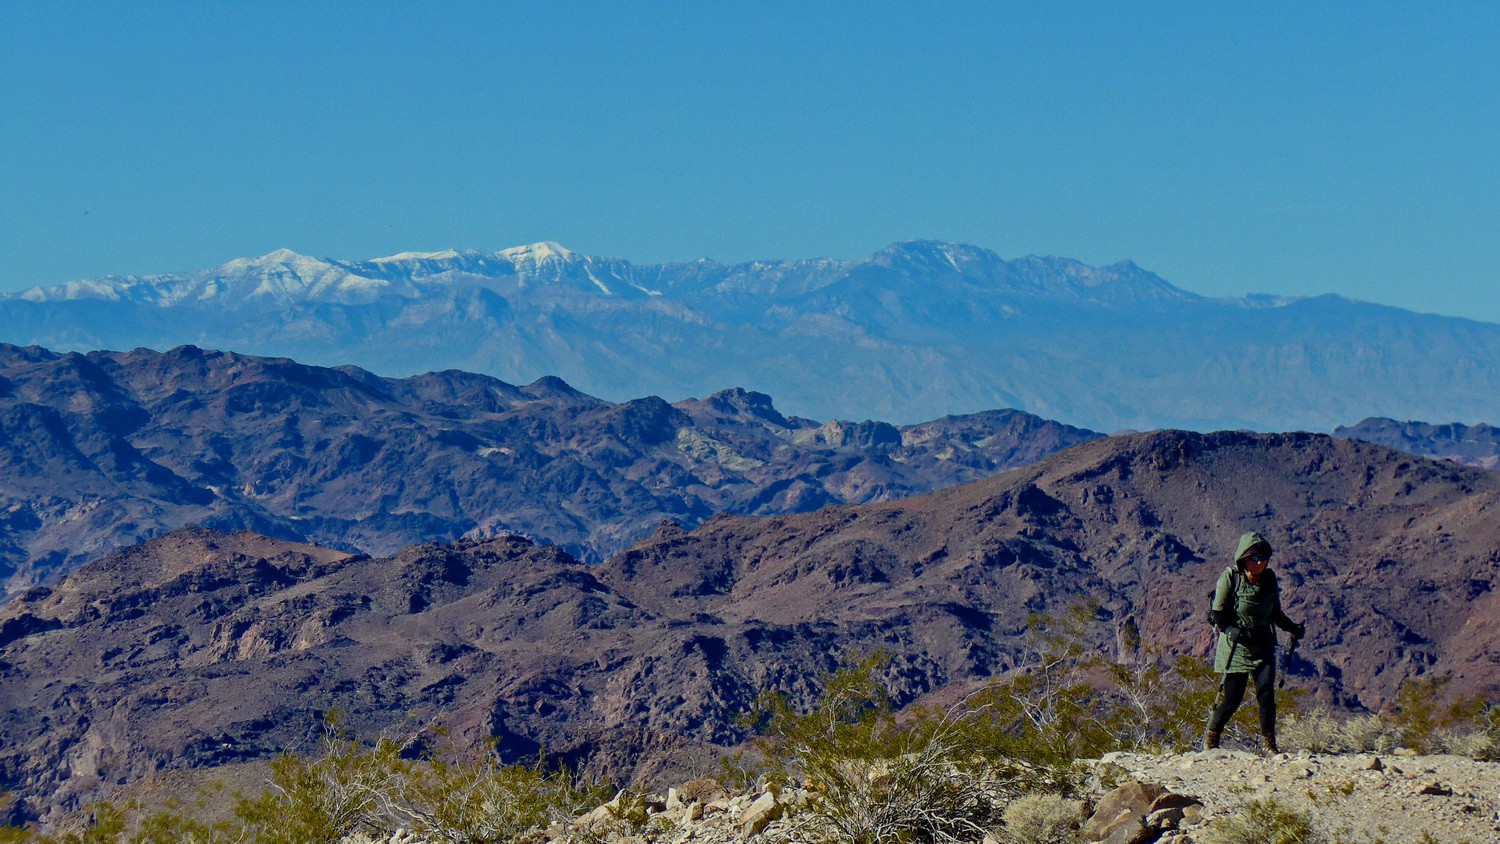 Snowy Spring Mountains seen from the way to the Lookout Kingman Wash